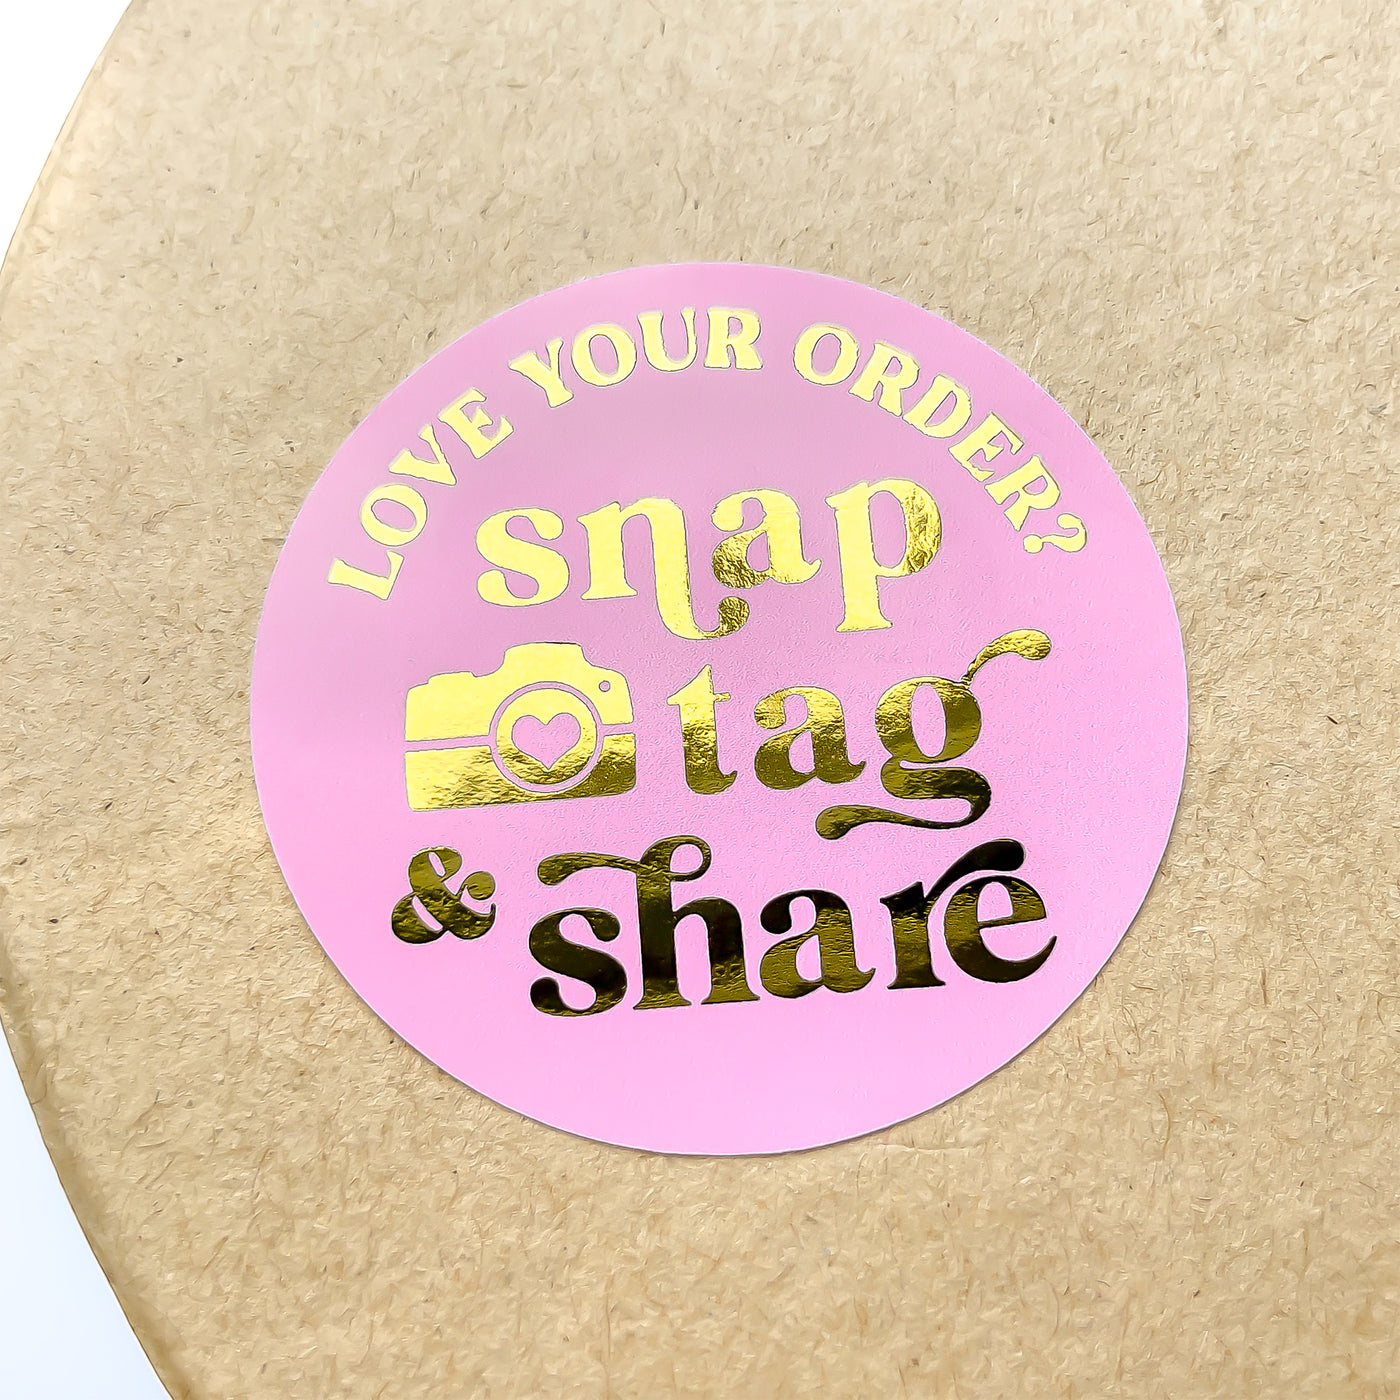 Foiled Retro LOVE YOUR ORDER ? SNAP TAG & SHARE Stickers ROUND